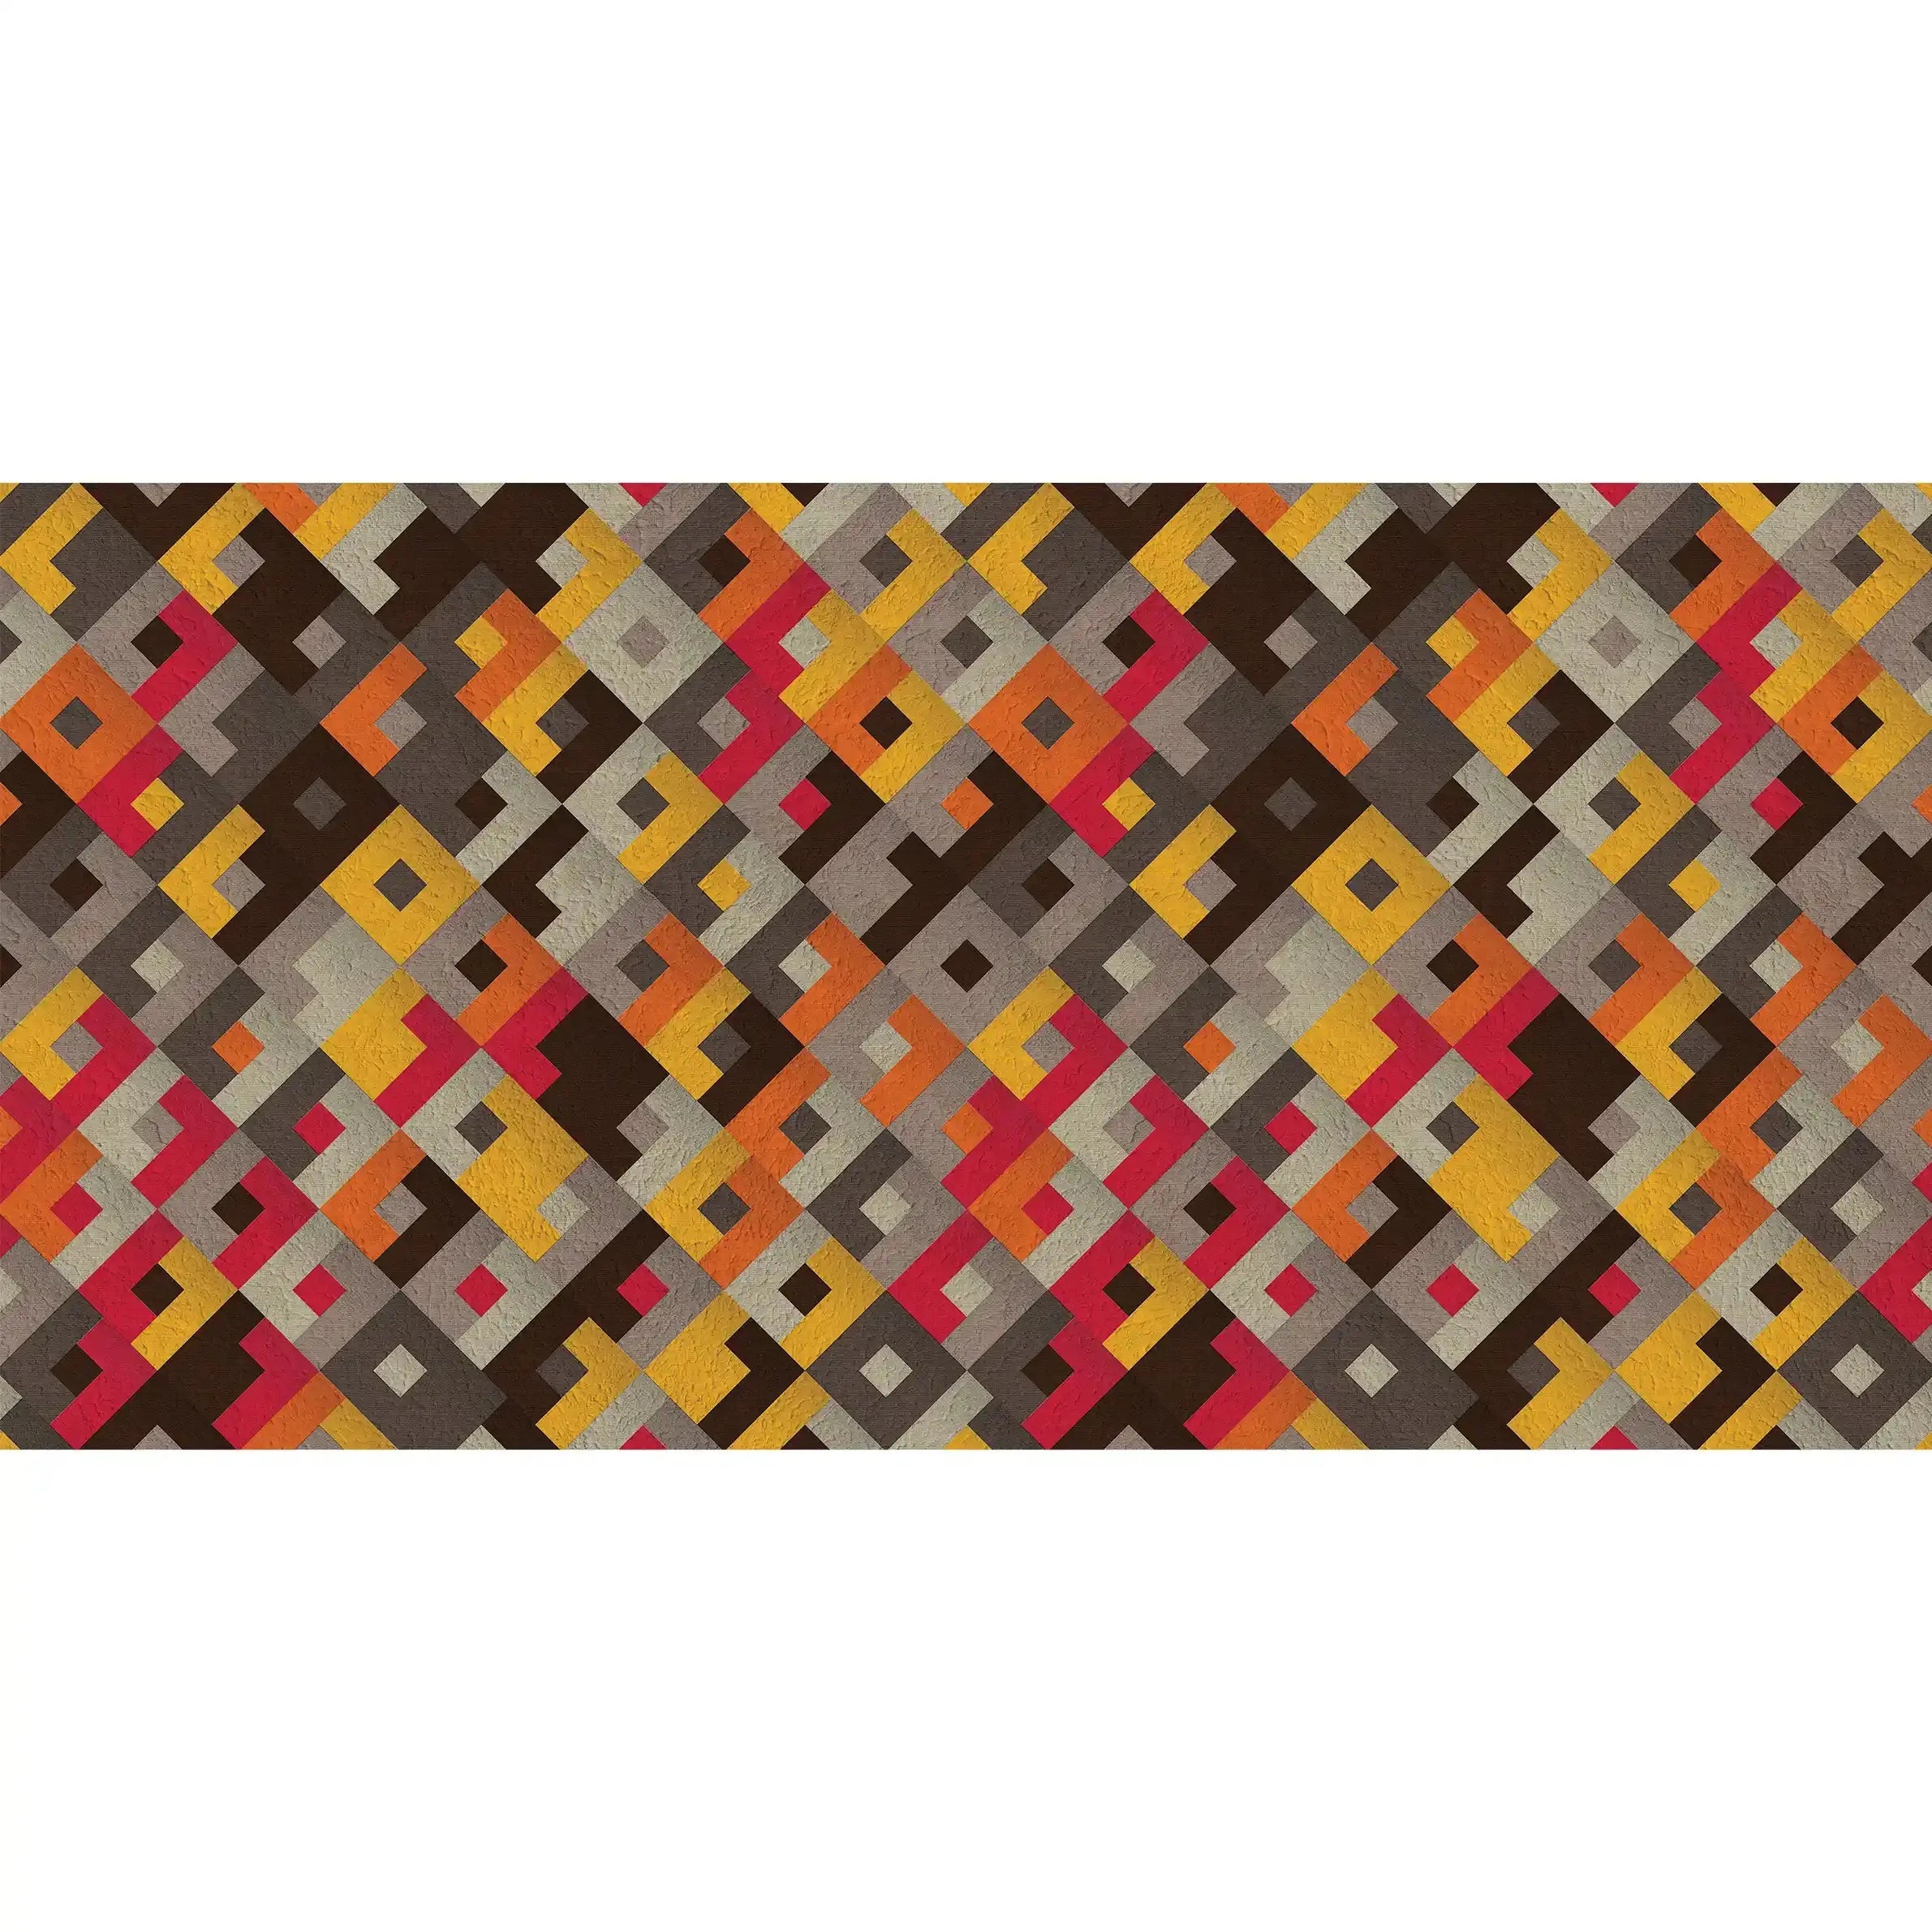 3064-A / Colorful Geometric Pattern Wallpaper - Peelable, Stickable, Ideal for Modern Wall Decor or Accent Wall - Artevella